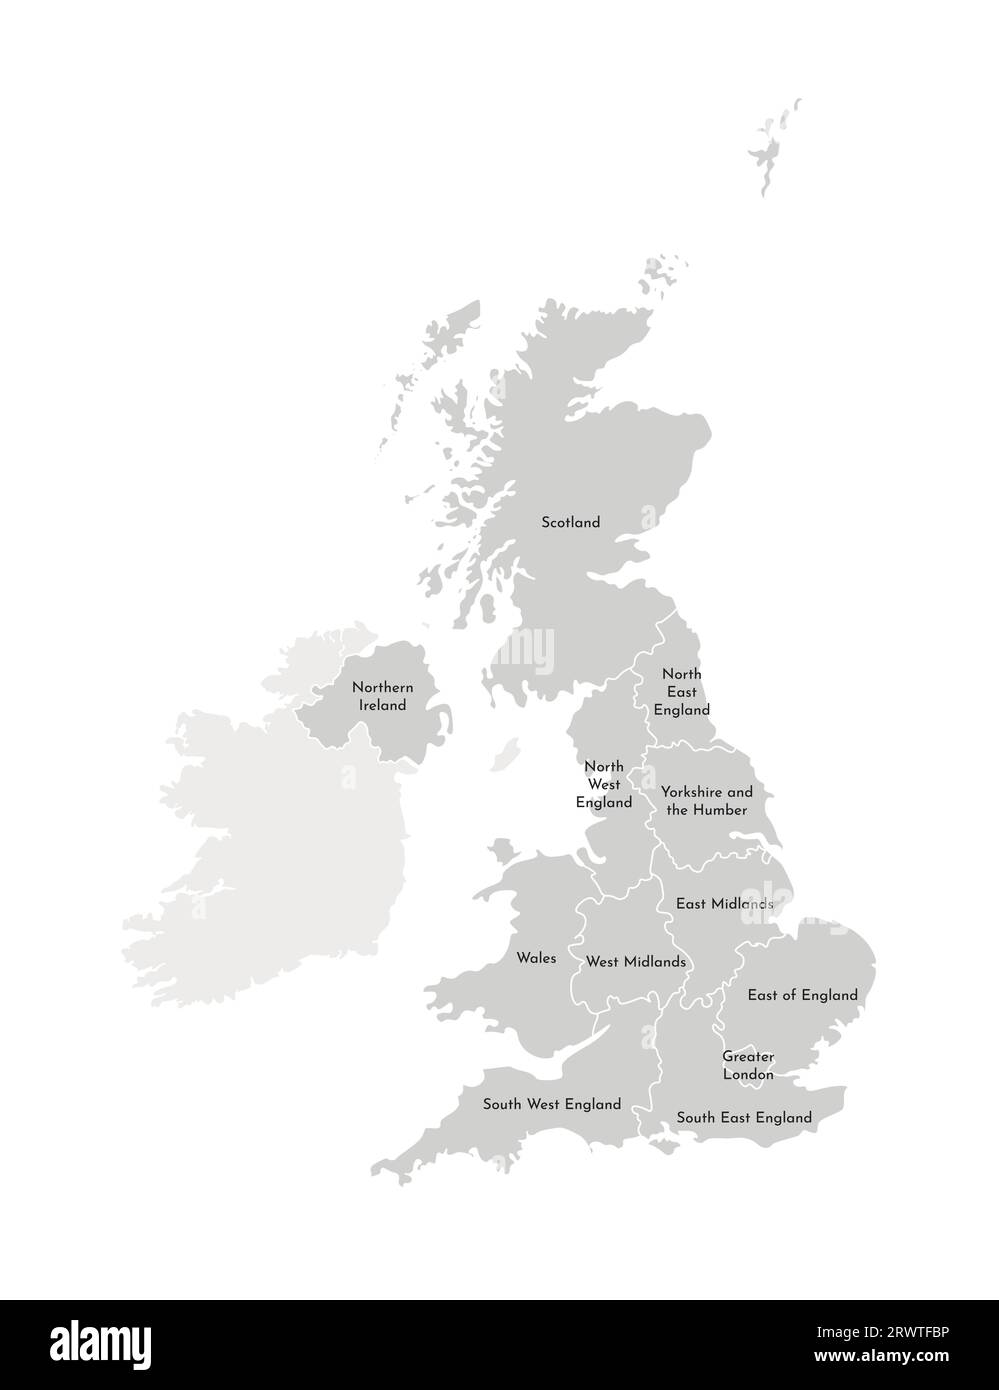 Vector isolated illustration of simplified administrative map of the United Kingdom of Great Britain and Northern Ireland. Borders and names of the re Stock Vector